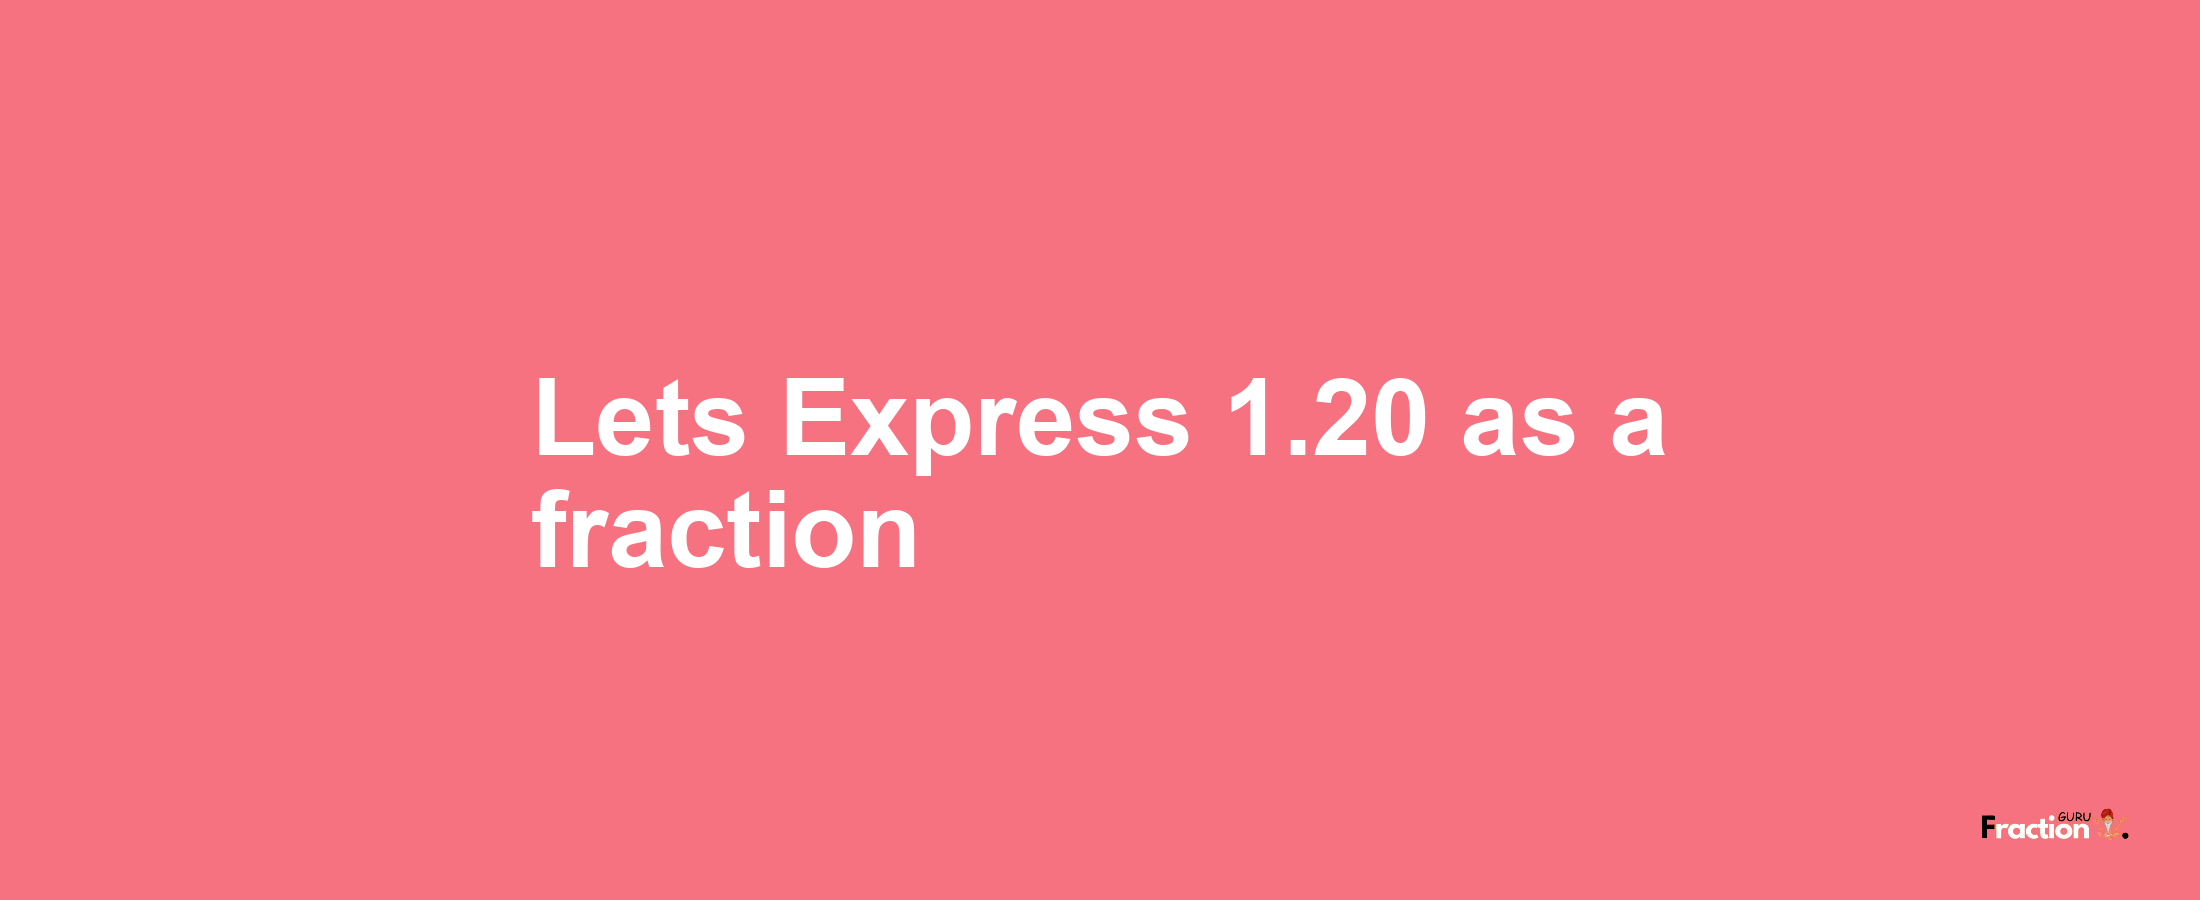 Lets Express 1.20 as afraction